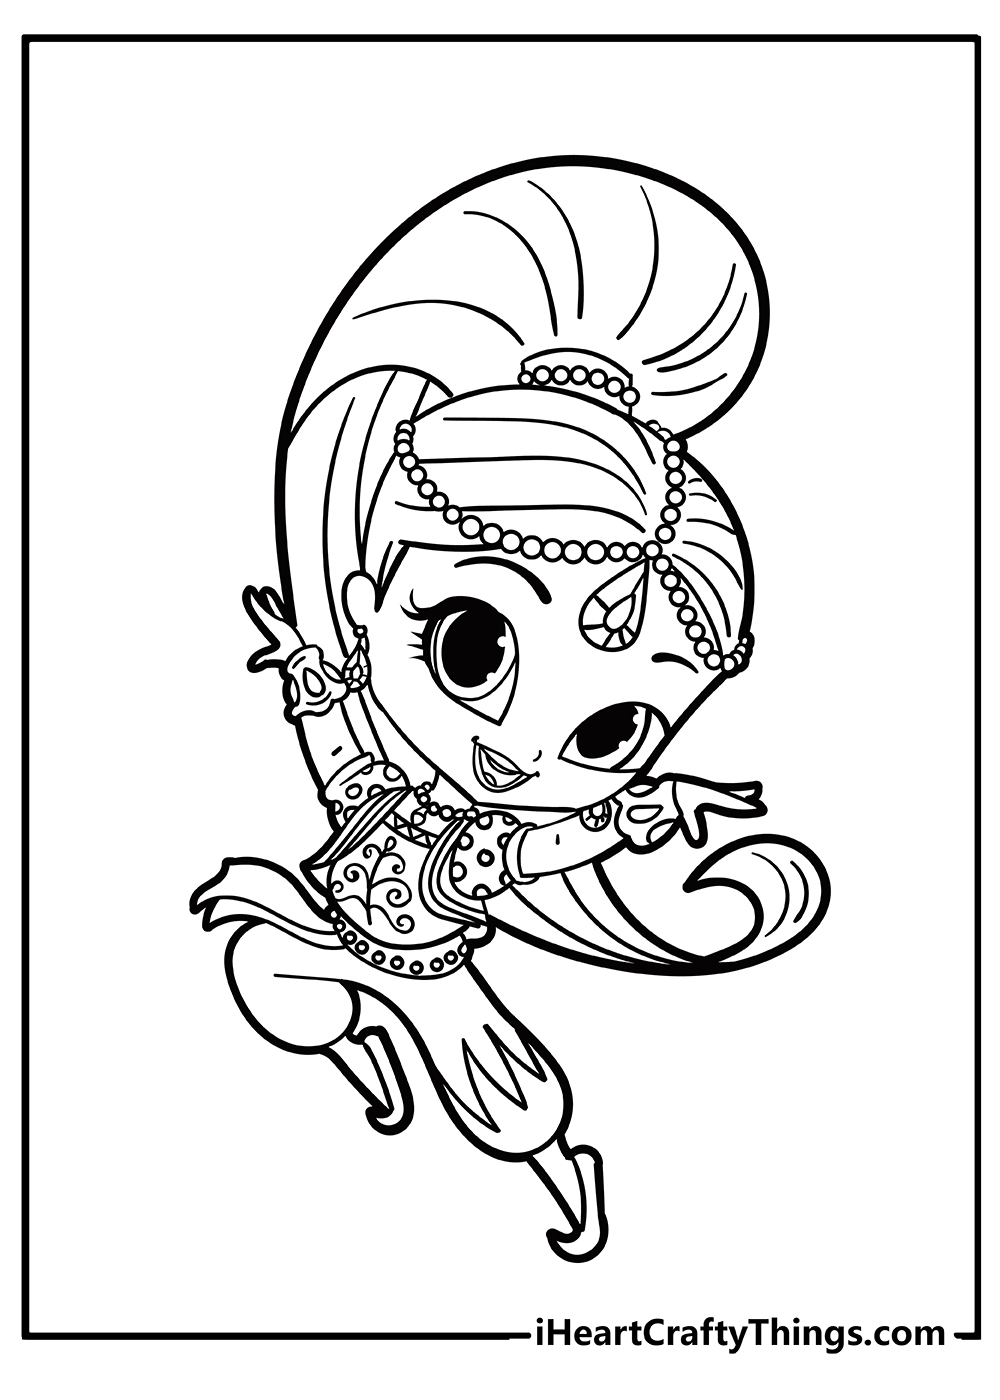 Printable Shimmer And Shine Coloring Pages Updated 20